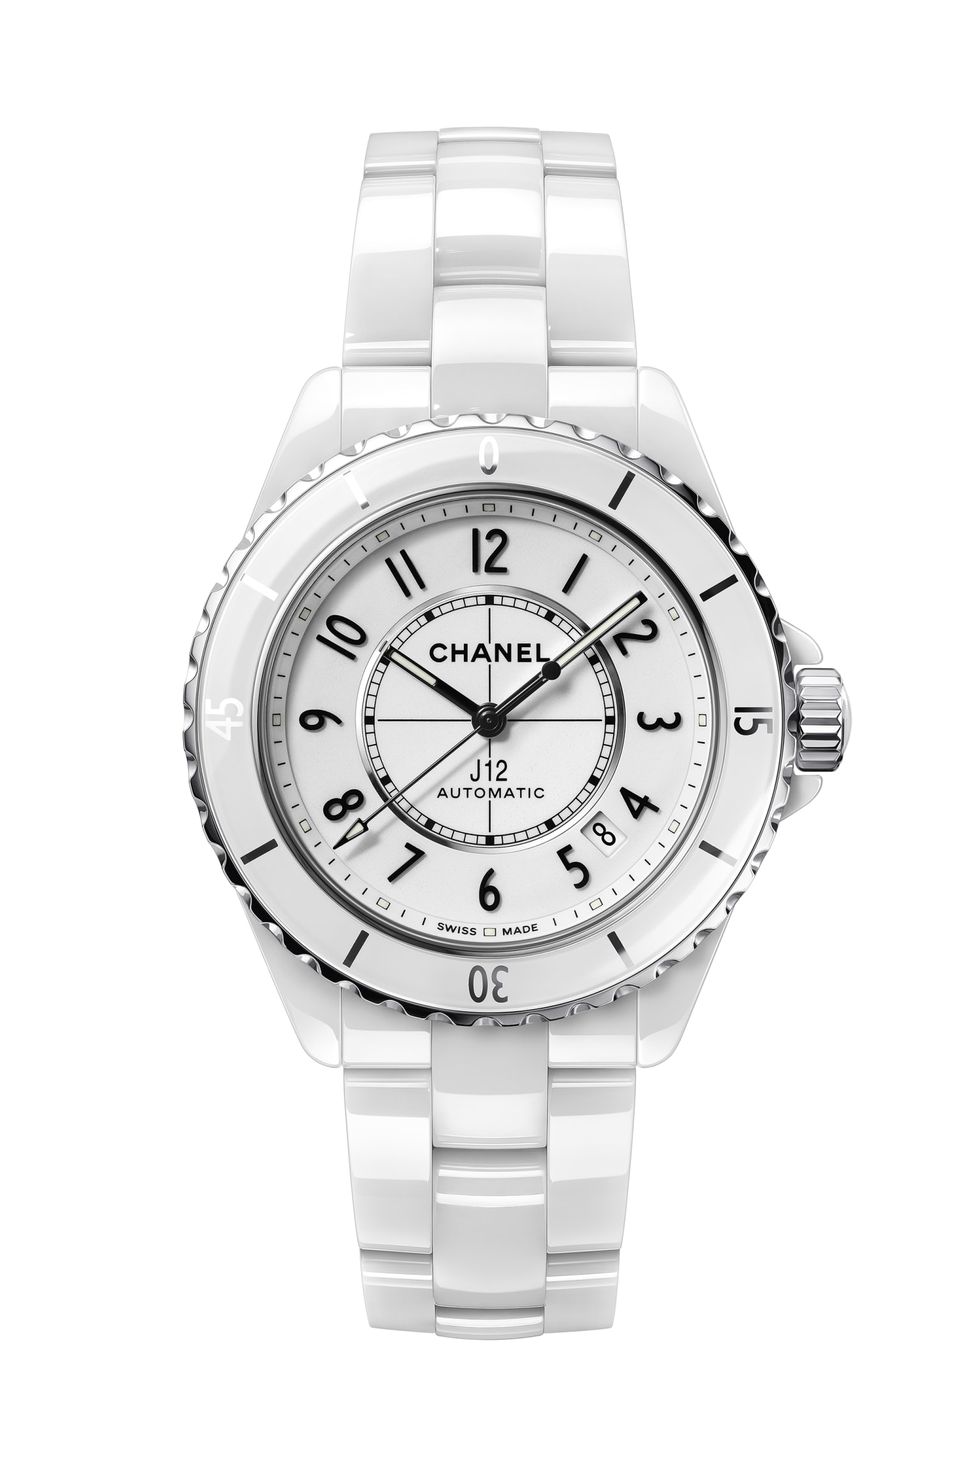 Chanel Introduces the J12 Paradoxe